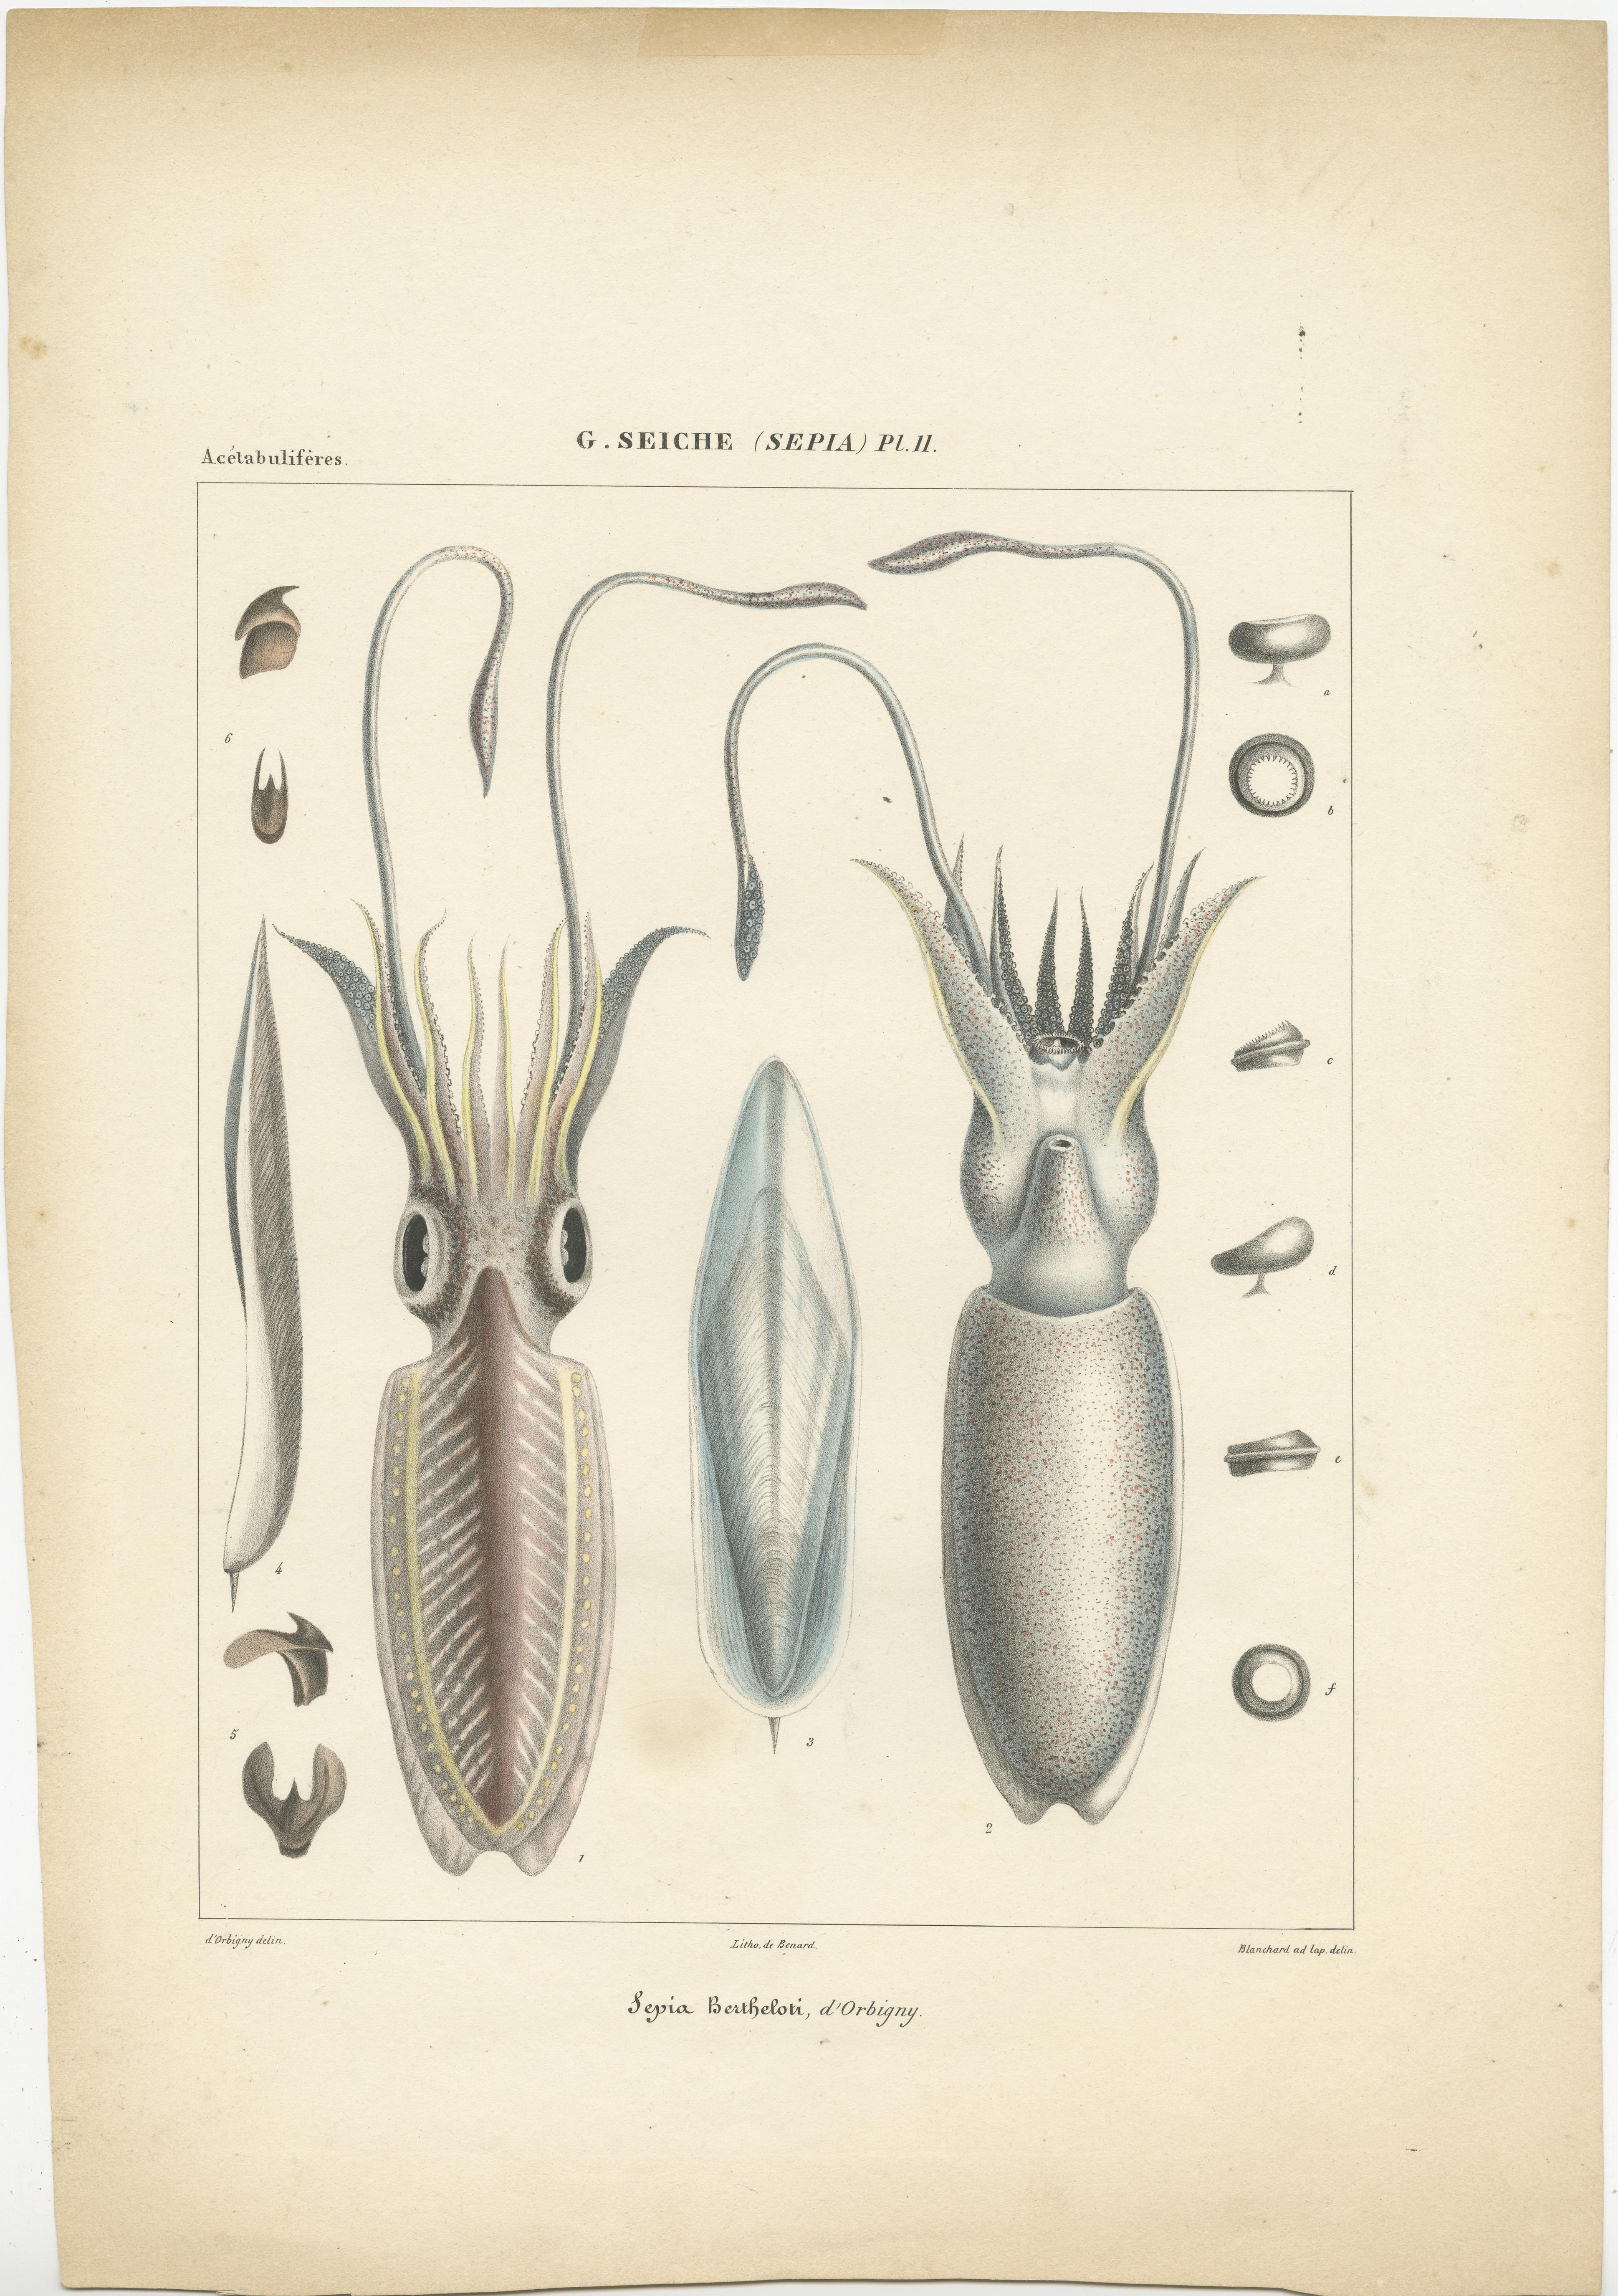 Antique print titled 'G. Seiche (Sepia) - Sepia Bertheloti d'Orbigny'. Sepia bertheloti, the African cuttlefish, is a species of cuttlefish from the family Sepiidae which is found in the warmer waters of the eastern Atlantic Ocean off